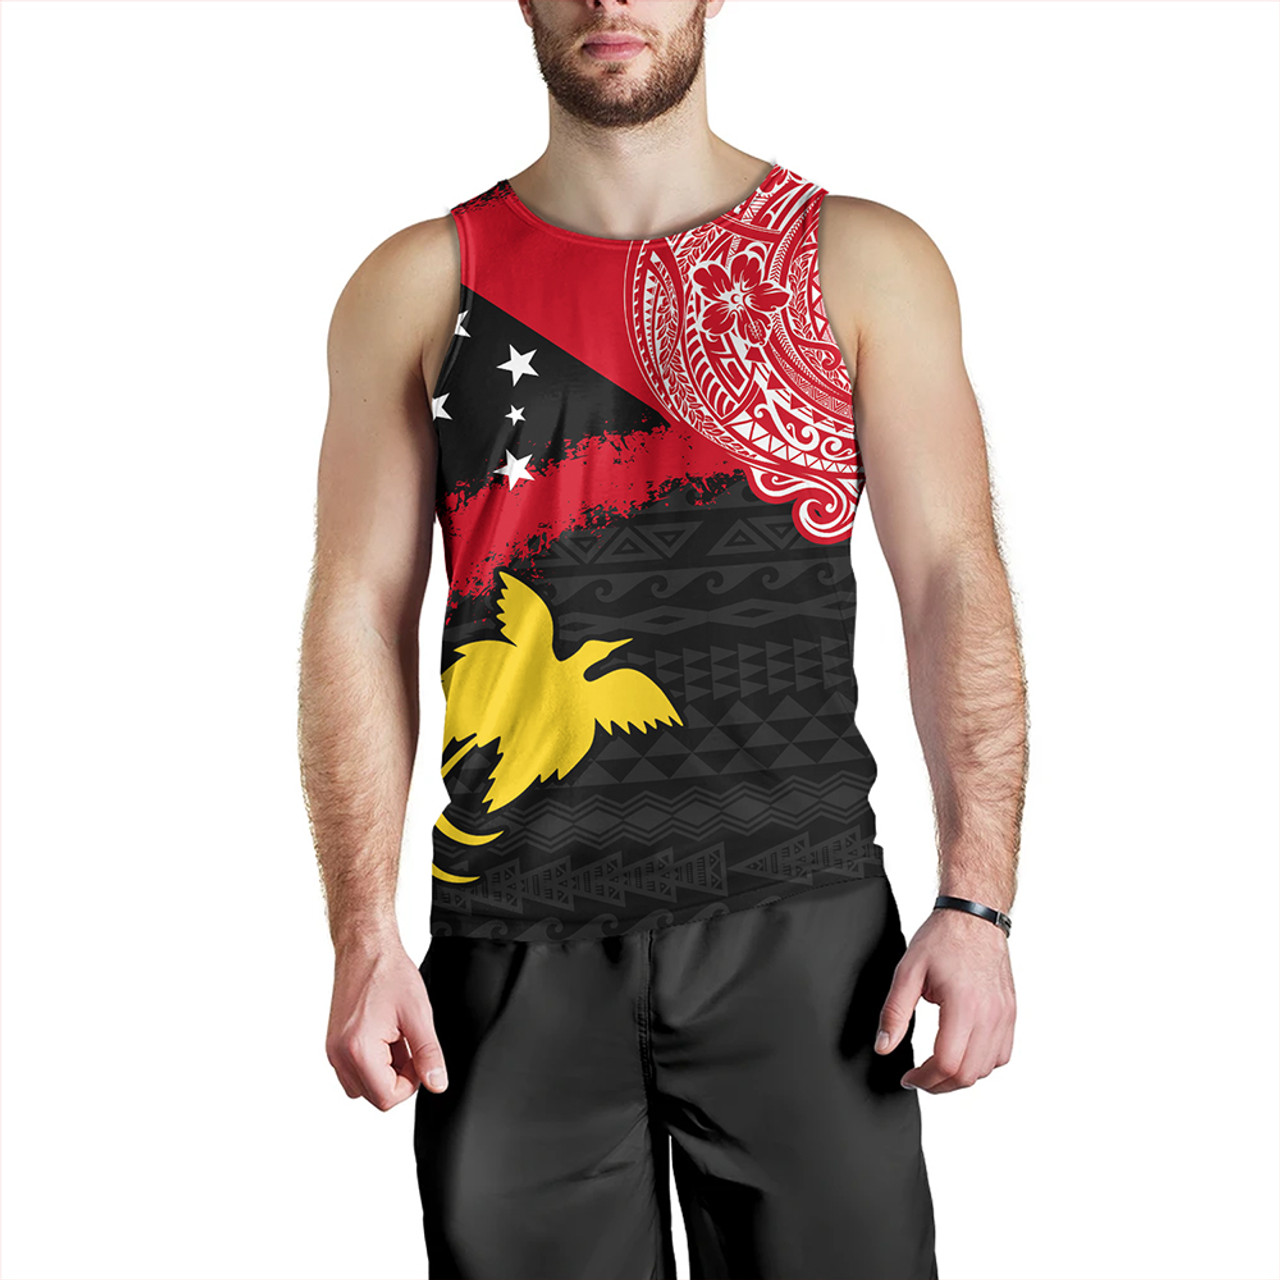 Papua Tank Top Melanesian Flag With Coat Of Arms